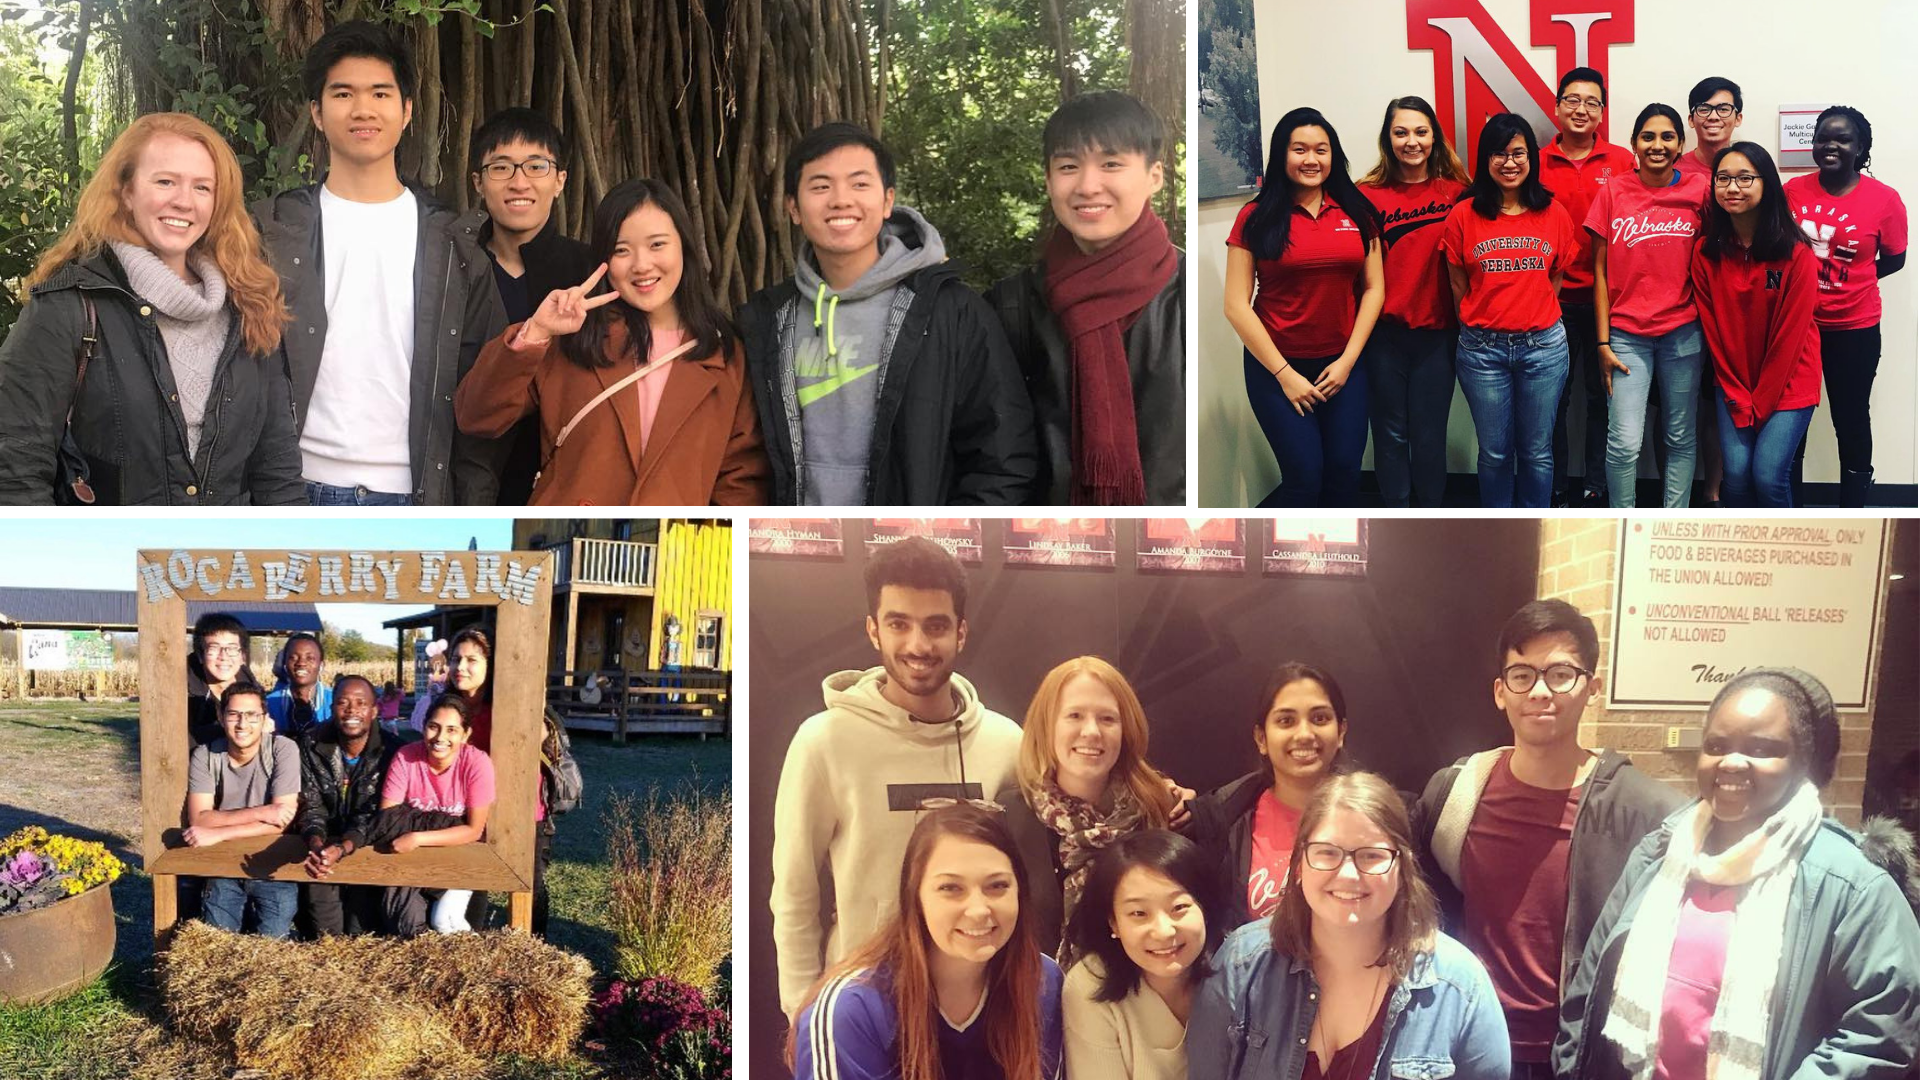 ISSO had a blast hosting various programming events for its international students and scholars during the fall 2018 semester, from an Omaha Zoo trip and New Student Orientation, to visiting Roca Berry farm and bowling night at East Campus.